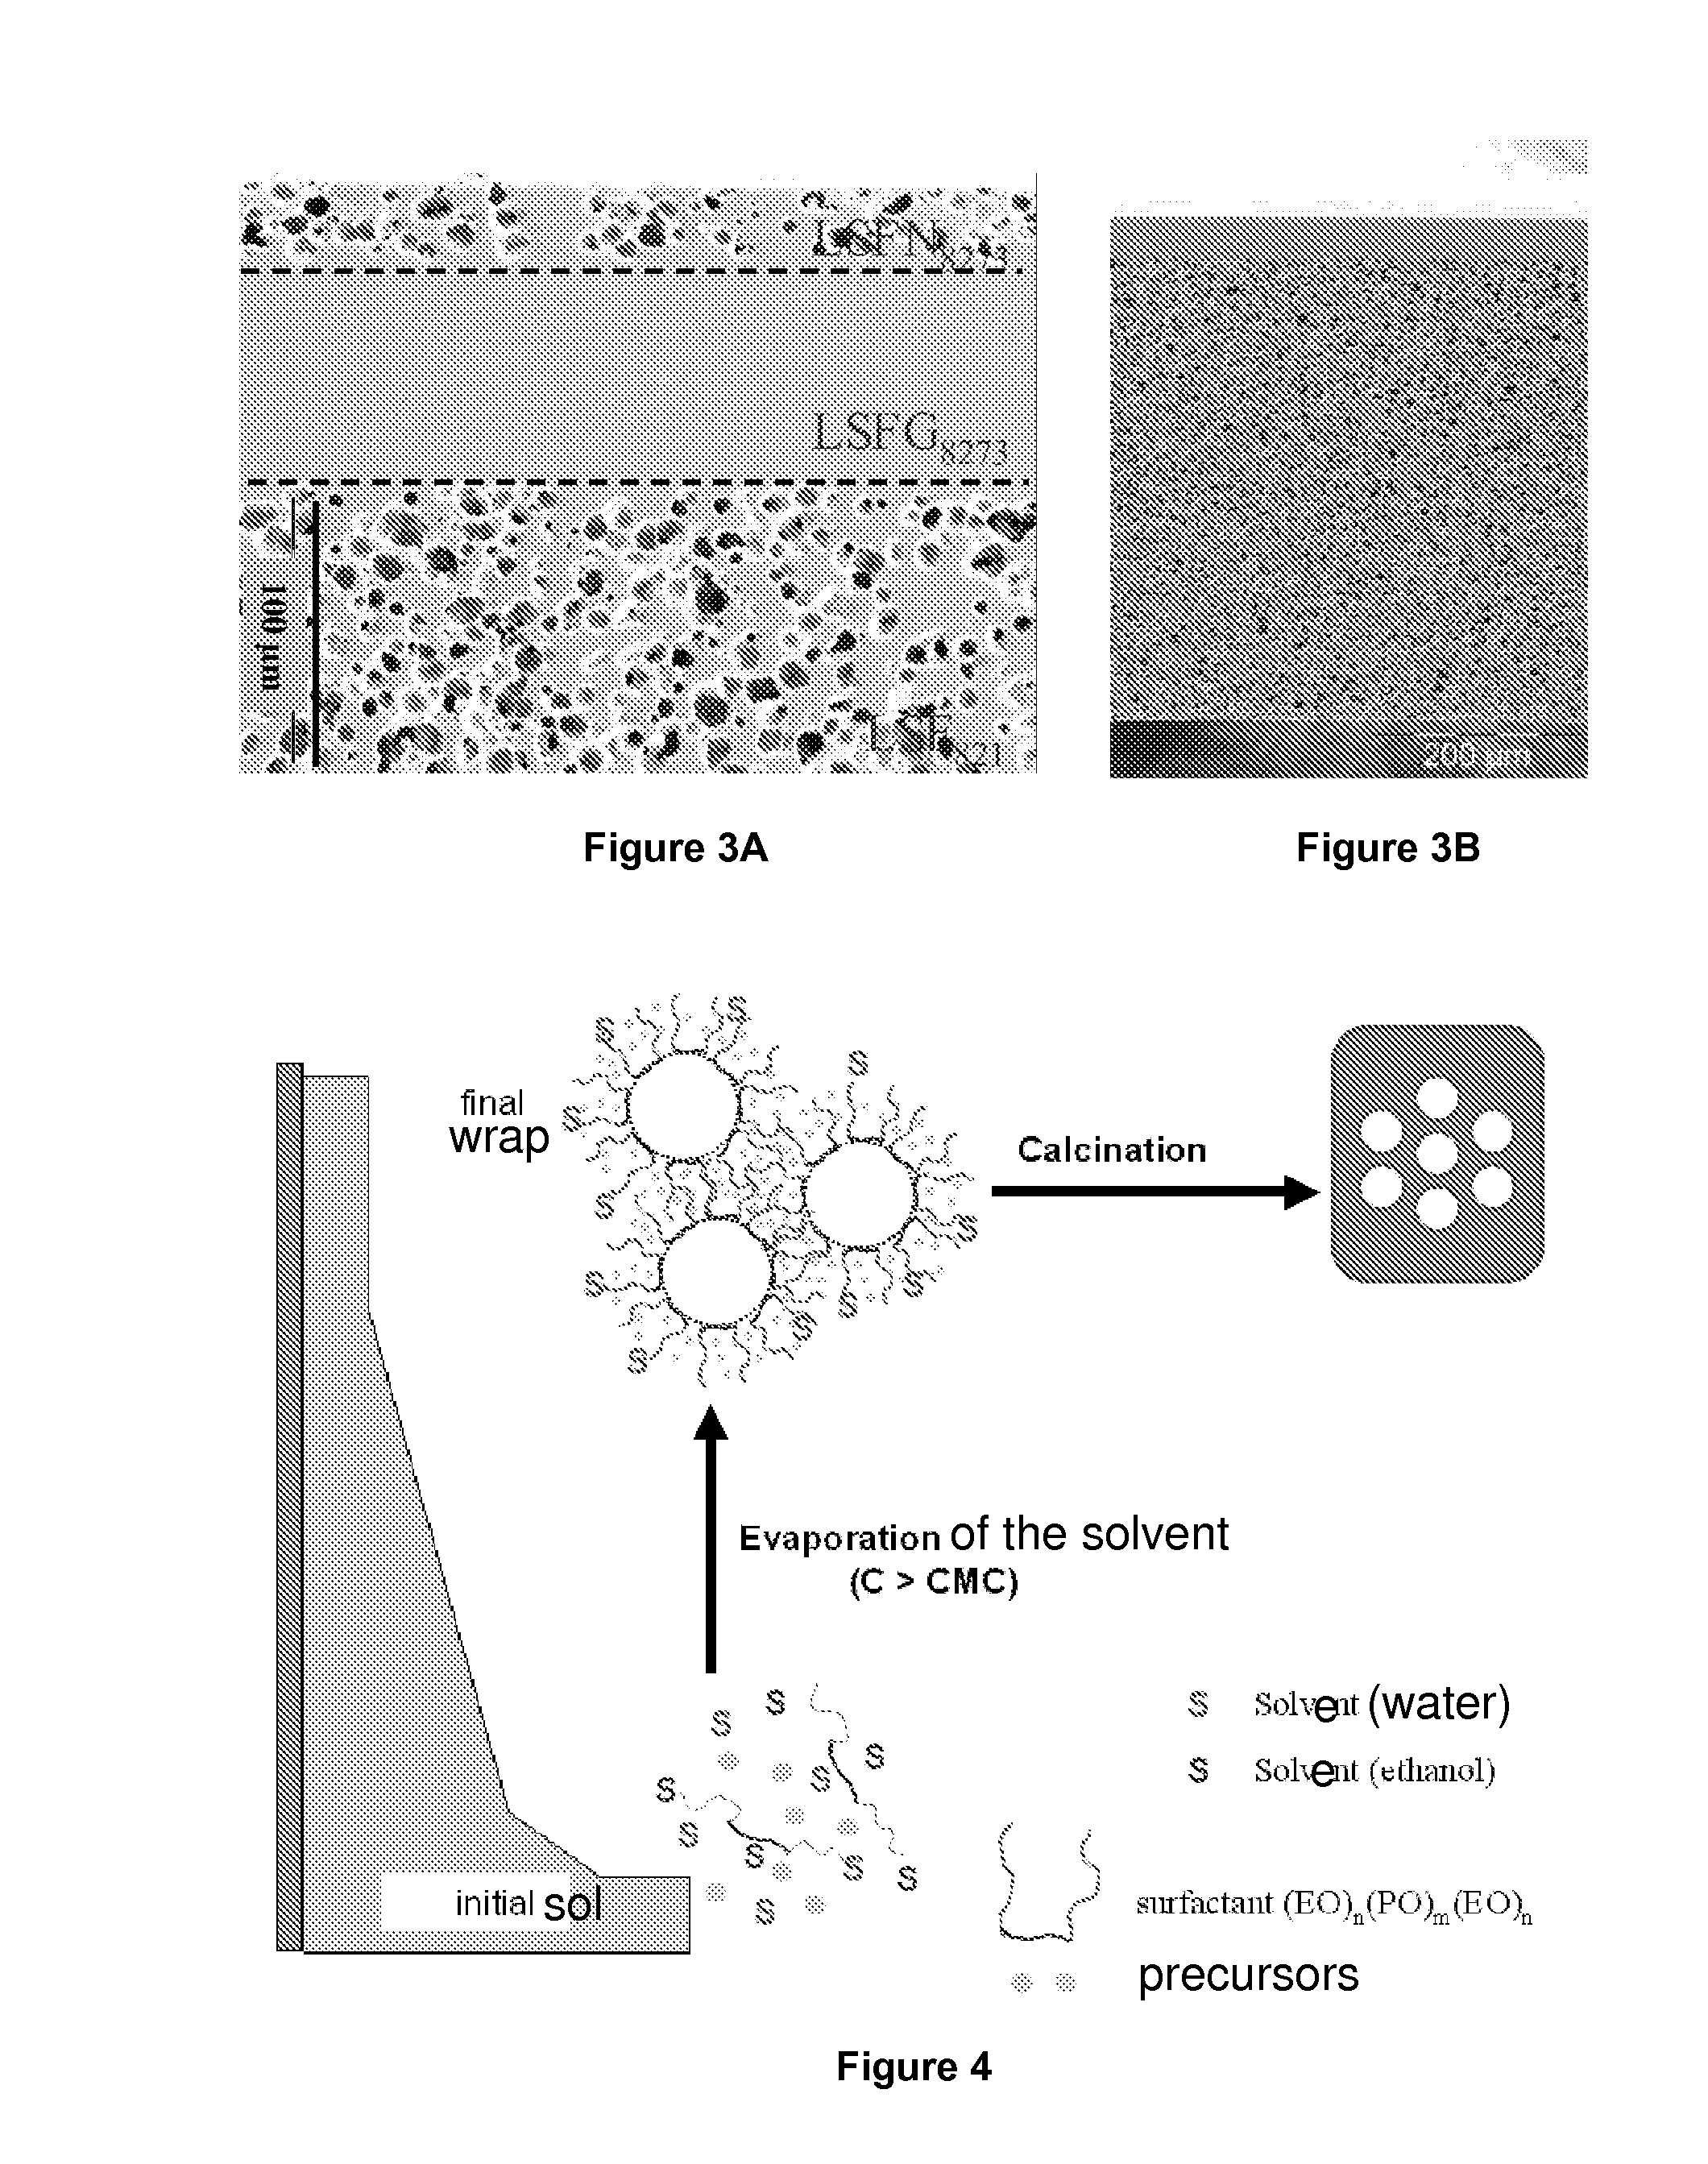 Process For Preparing A Sol-Gel From At Least Three Metal Salts And Use Of The Process For Preparing A Ceramic Membrane